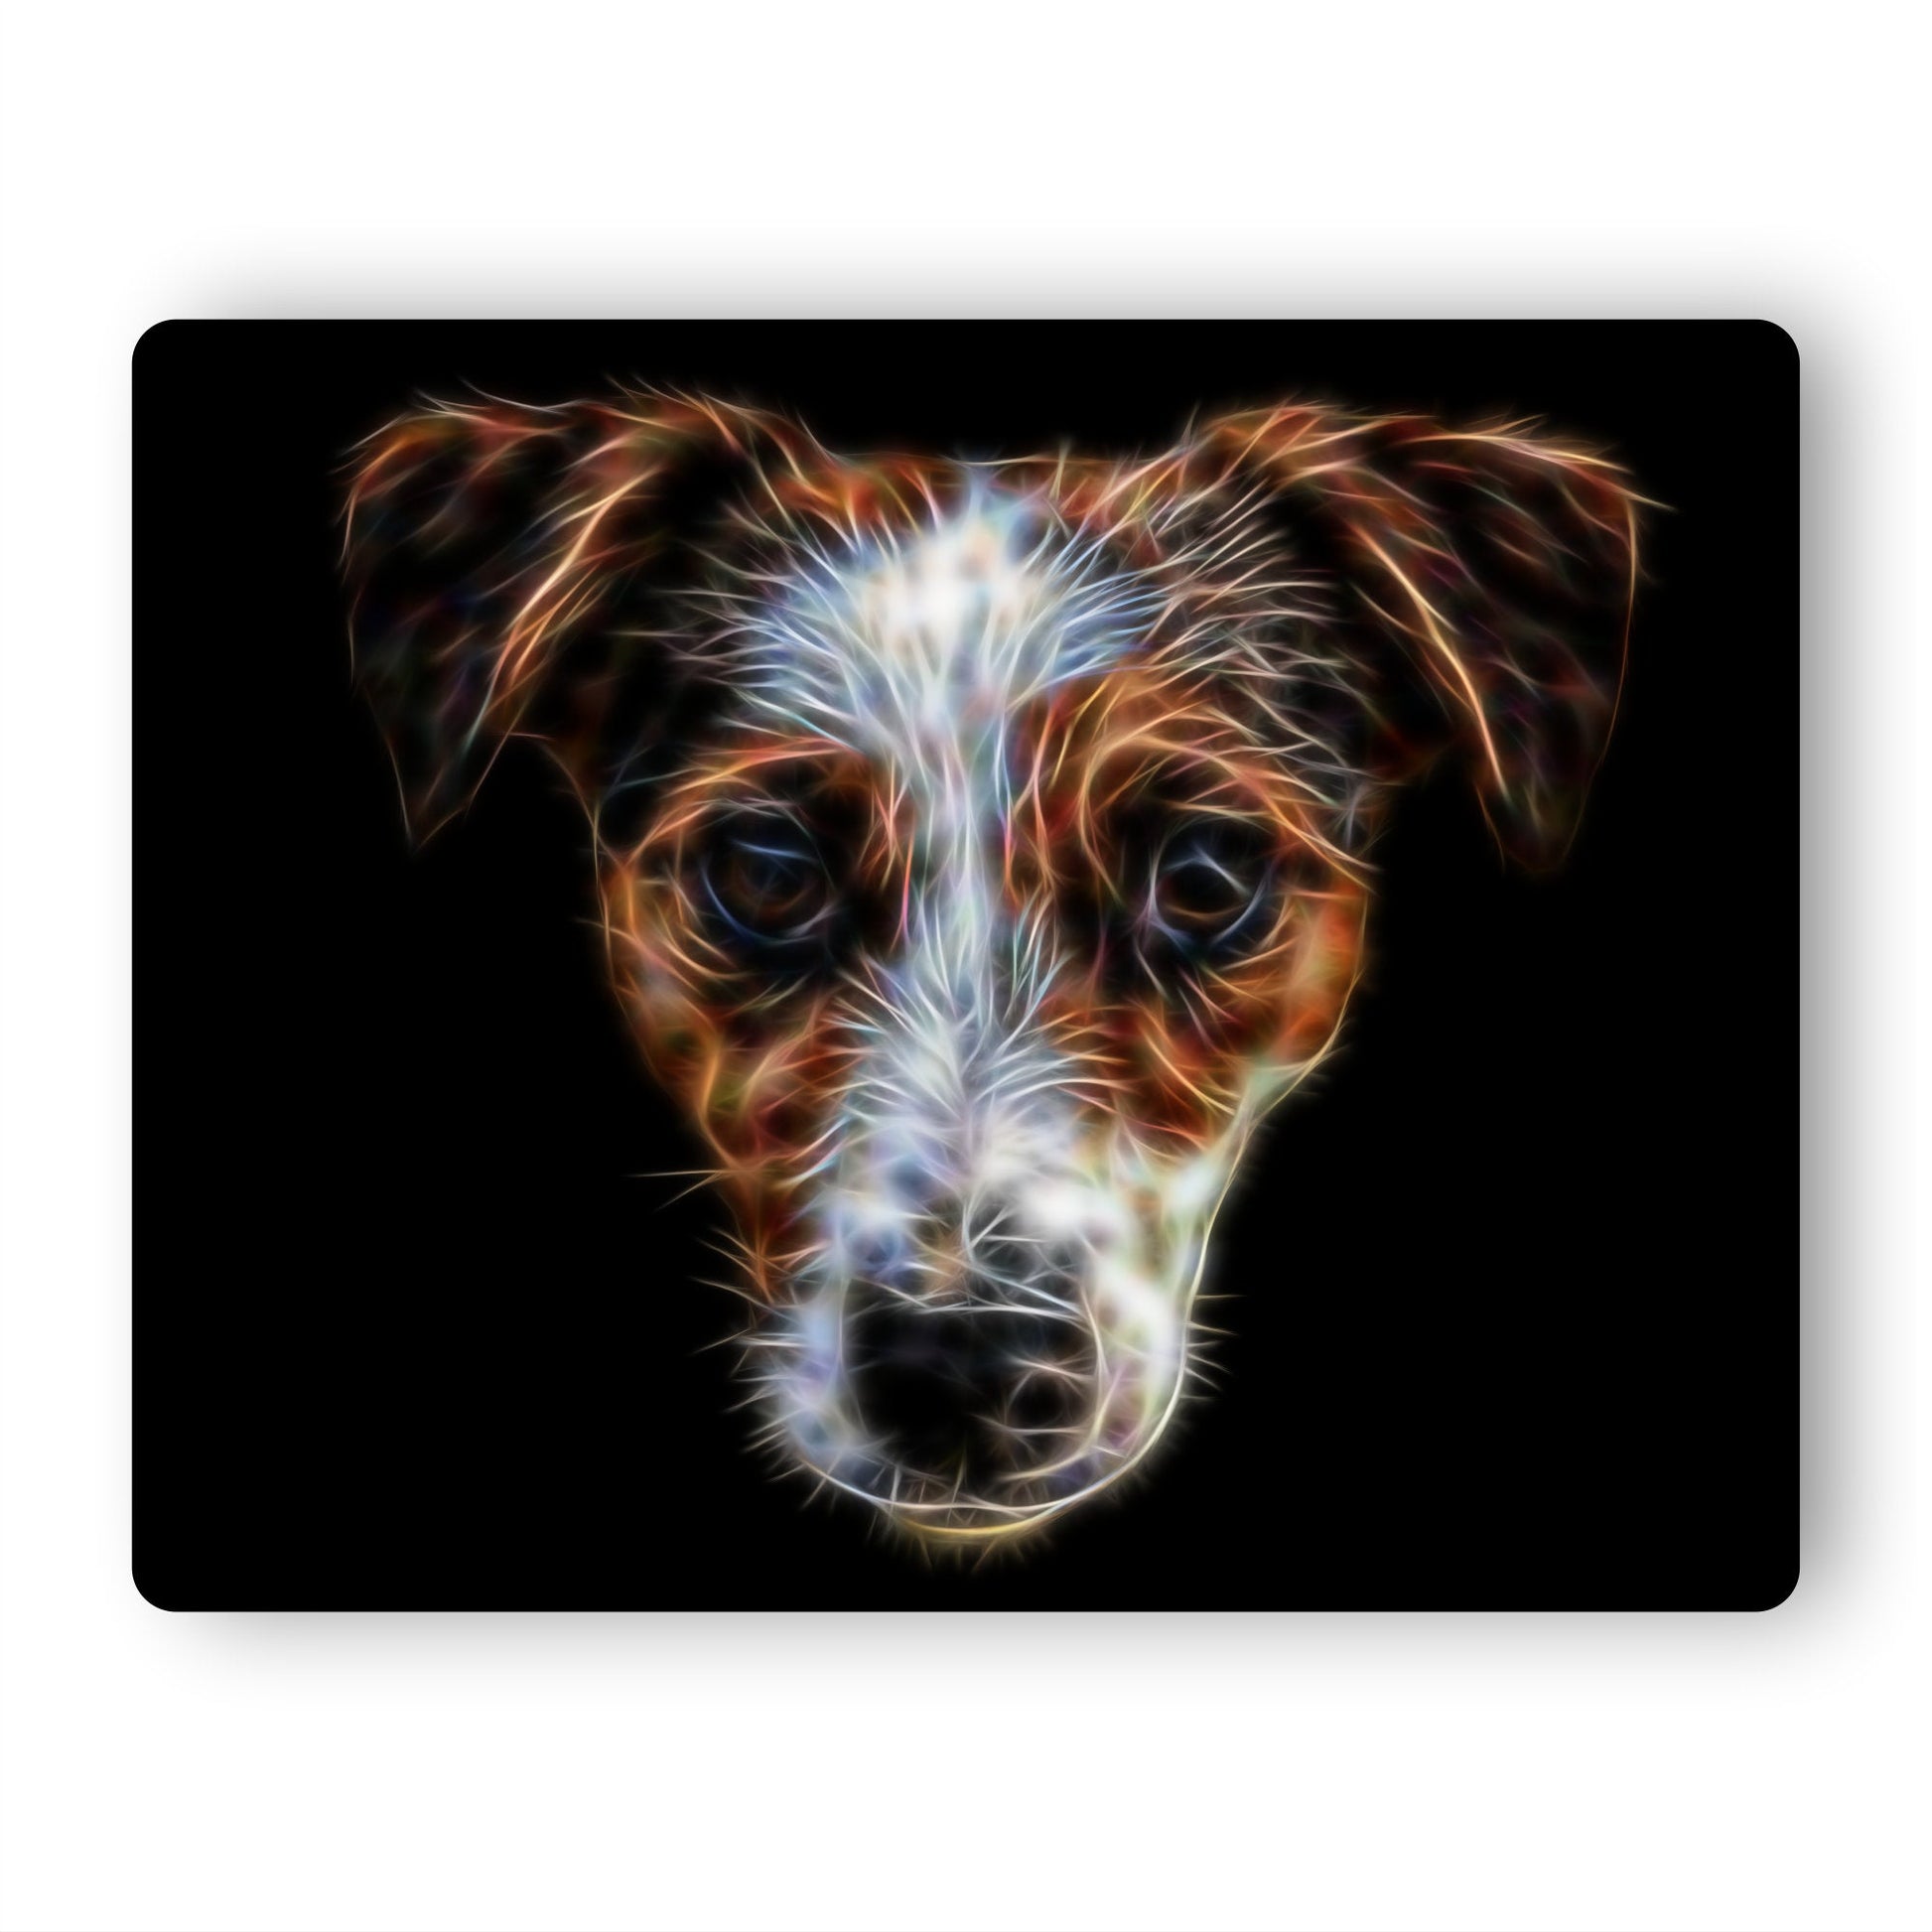 Jack Russell Metal Wall Plaque with Stunning Fractal Art Design.